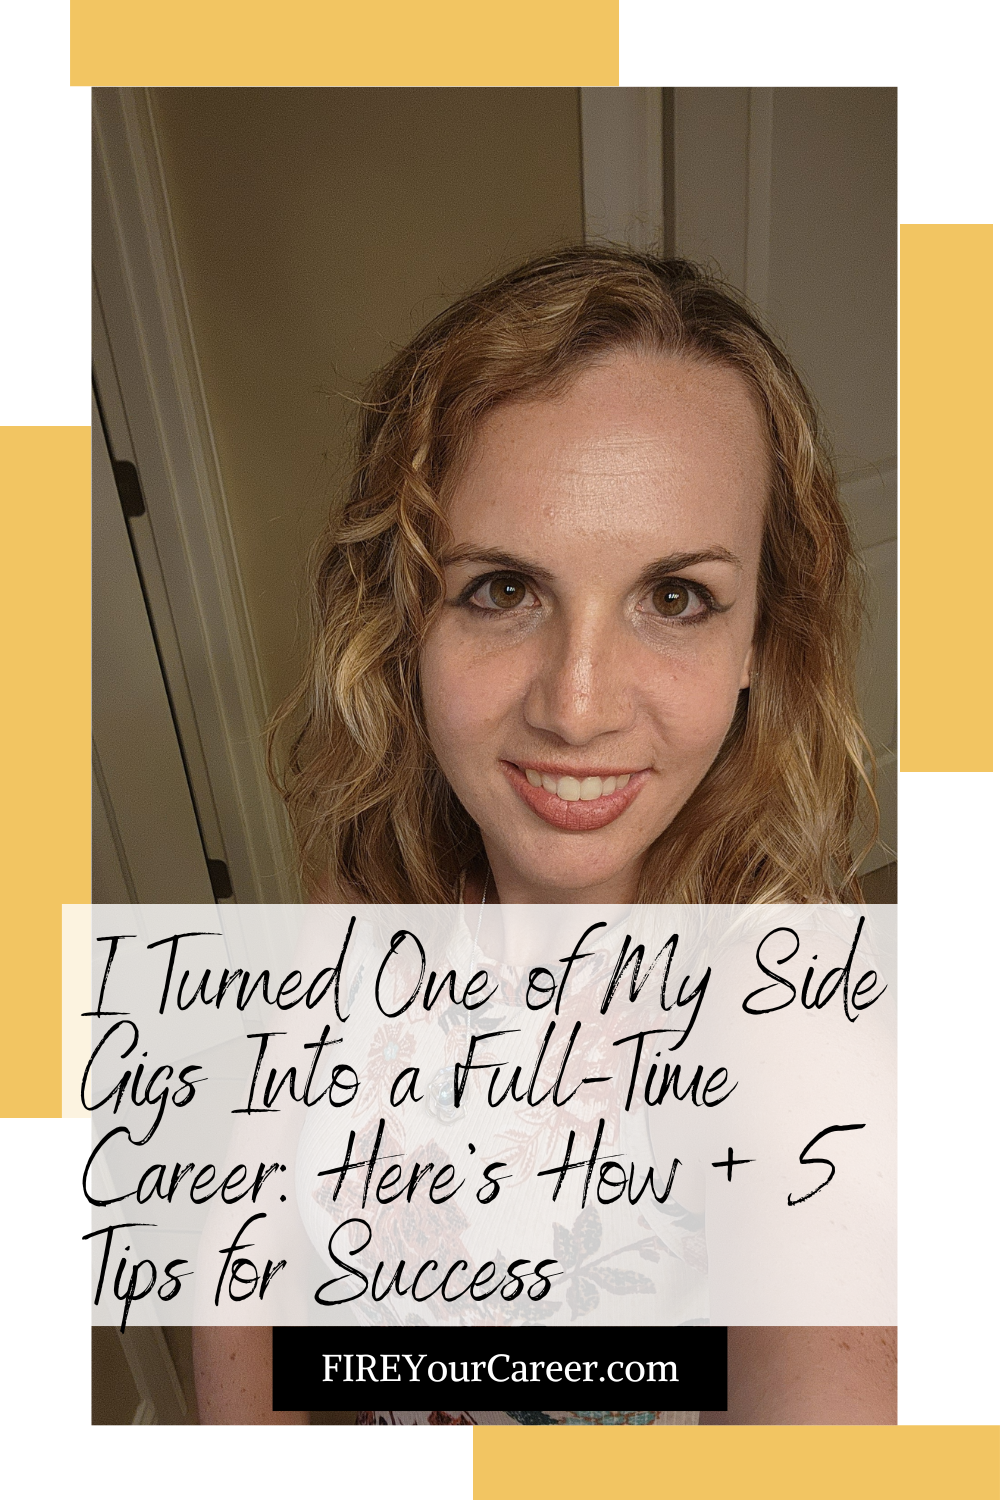 I Turned One of My Side Gigs Into a Full-Time Career Here’s How + 5 Tips for Success Pinterest